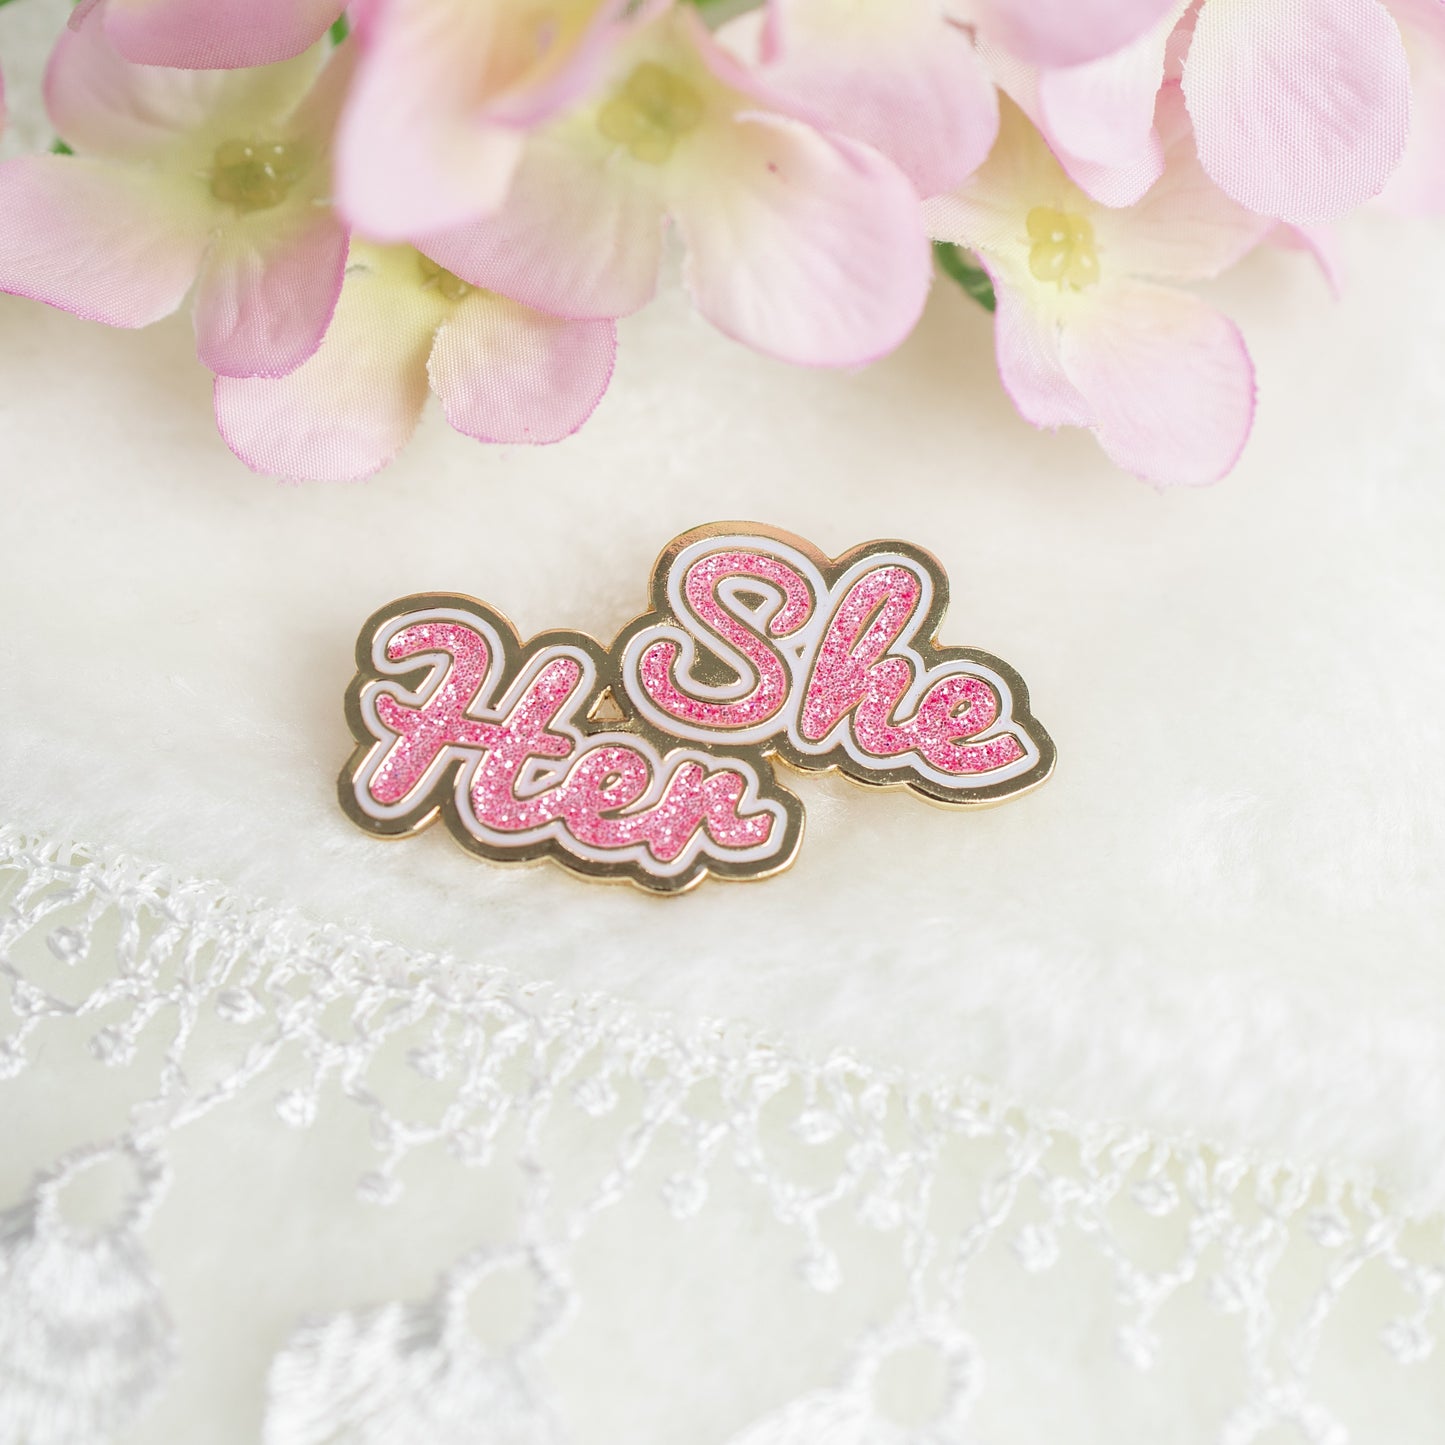 She/Her Pin